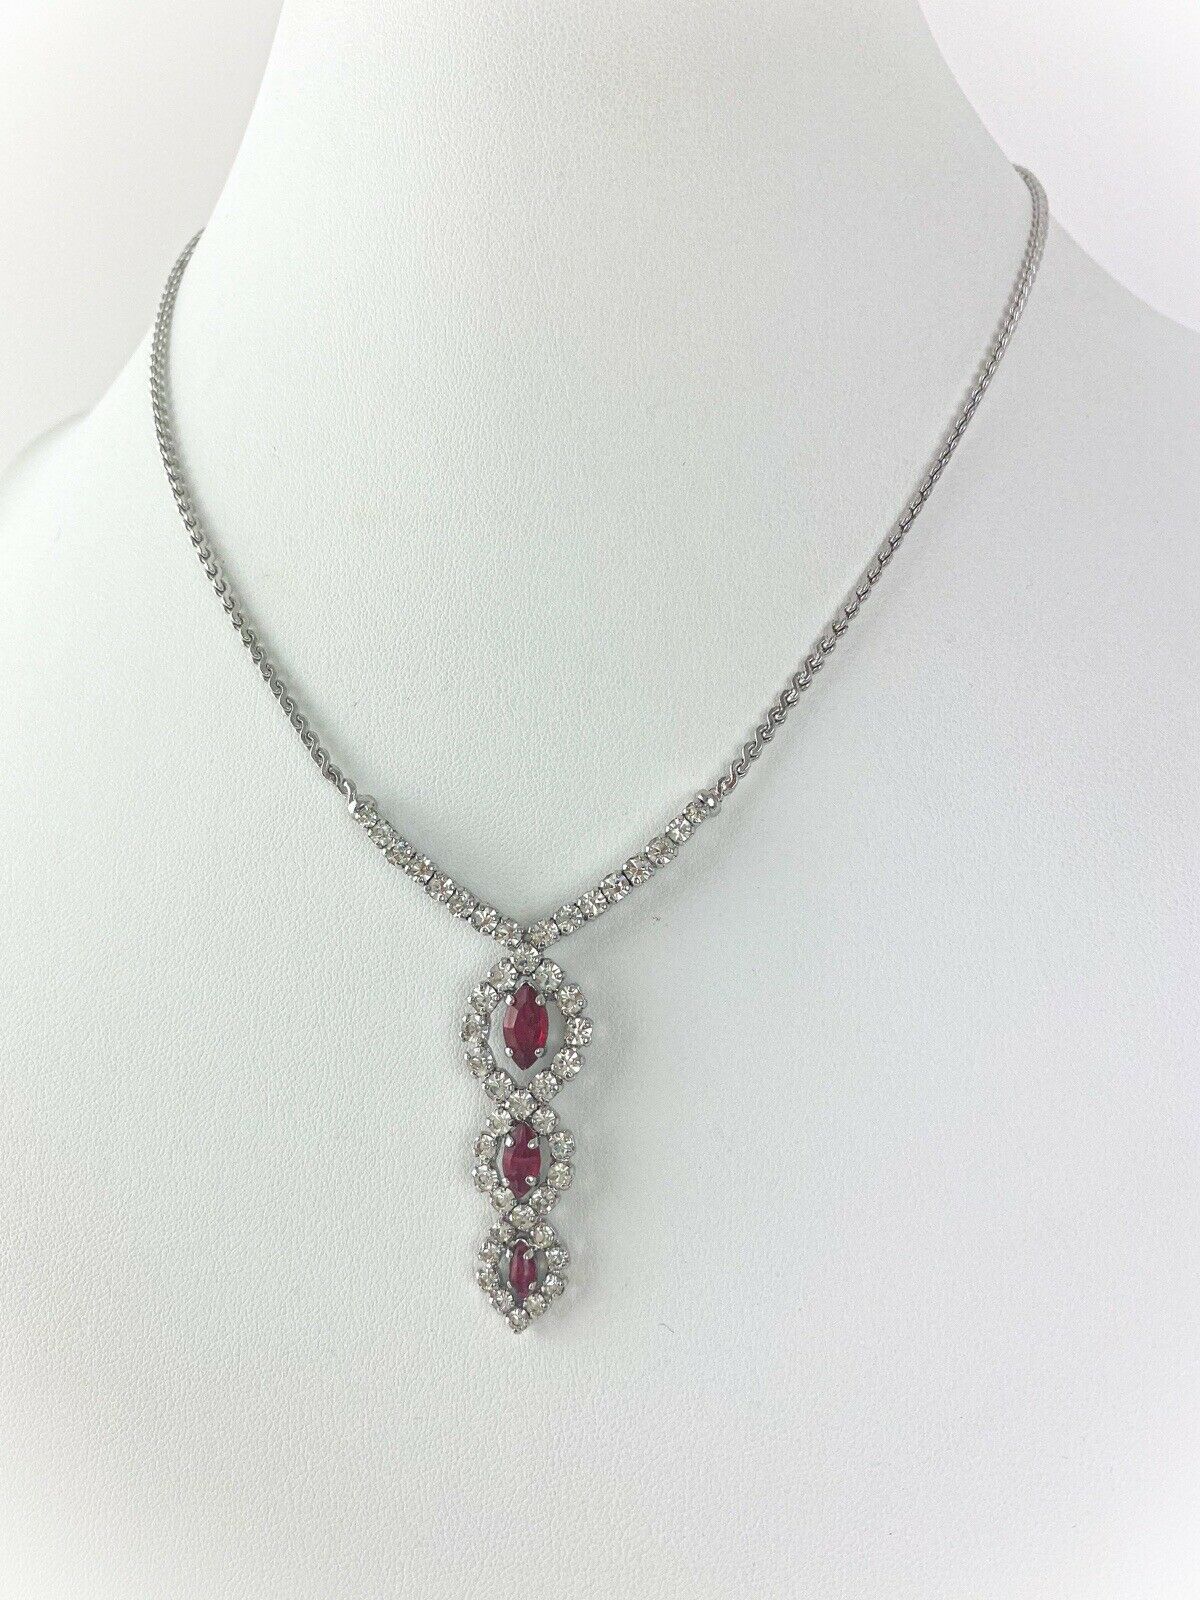 vintage Christian Dior ruby necklace choker 